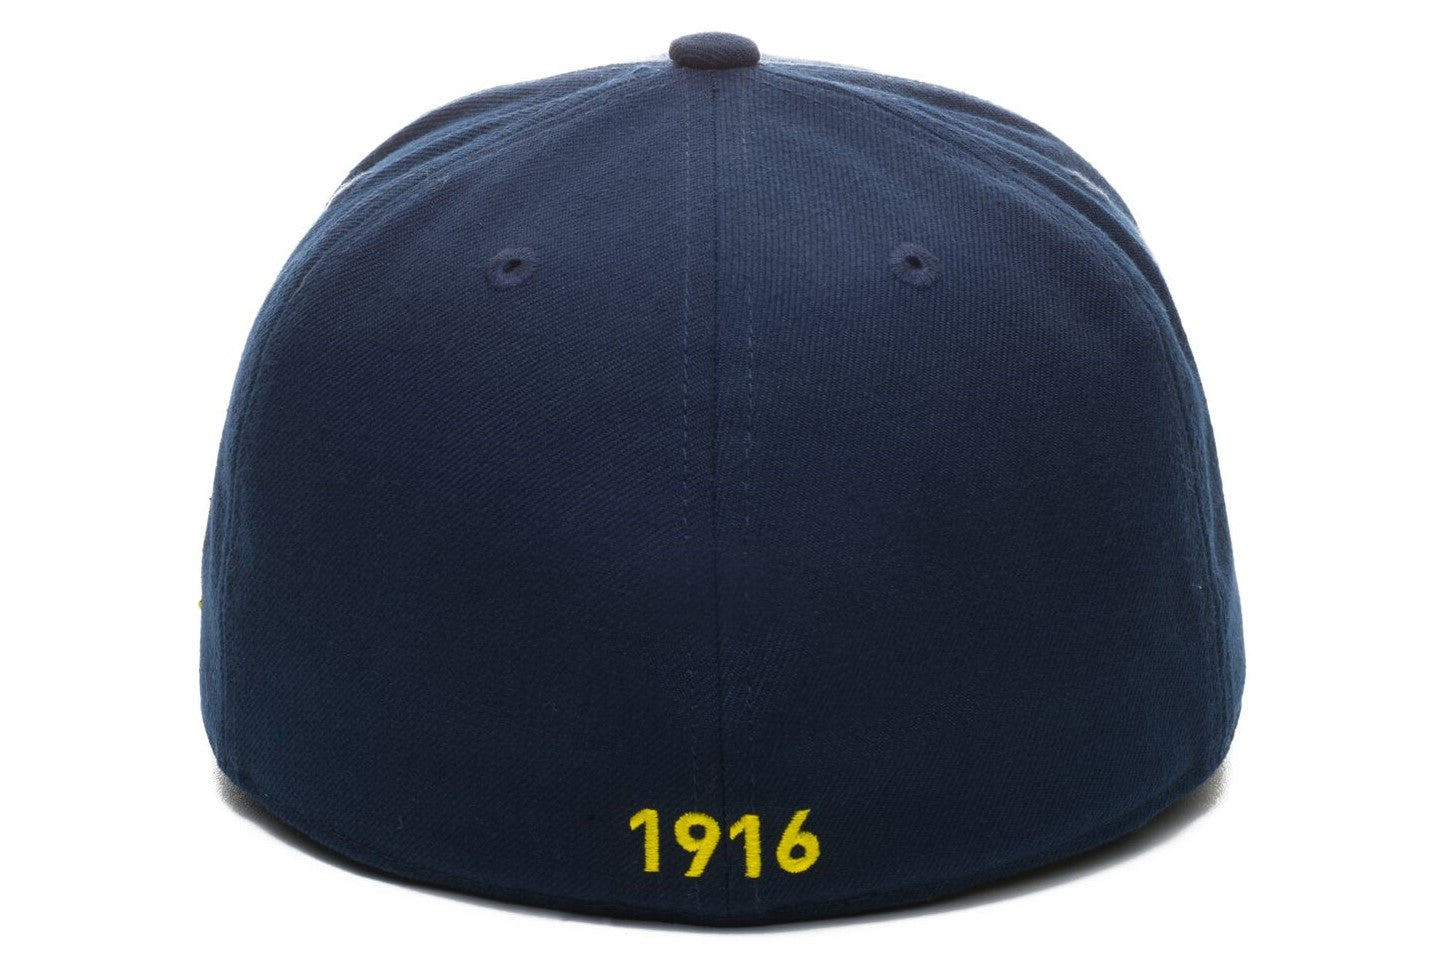 Fi Collections Club America Fitted Hat